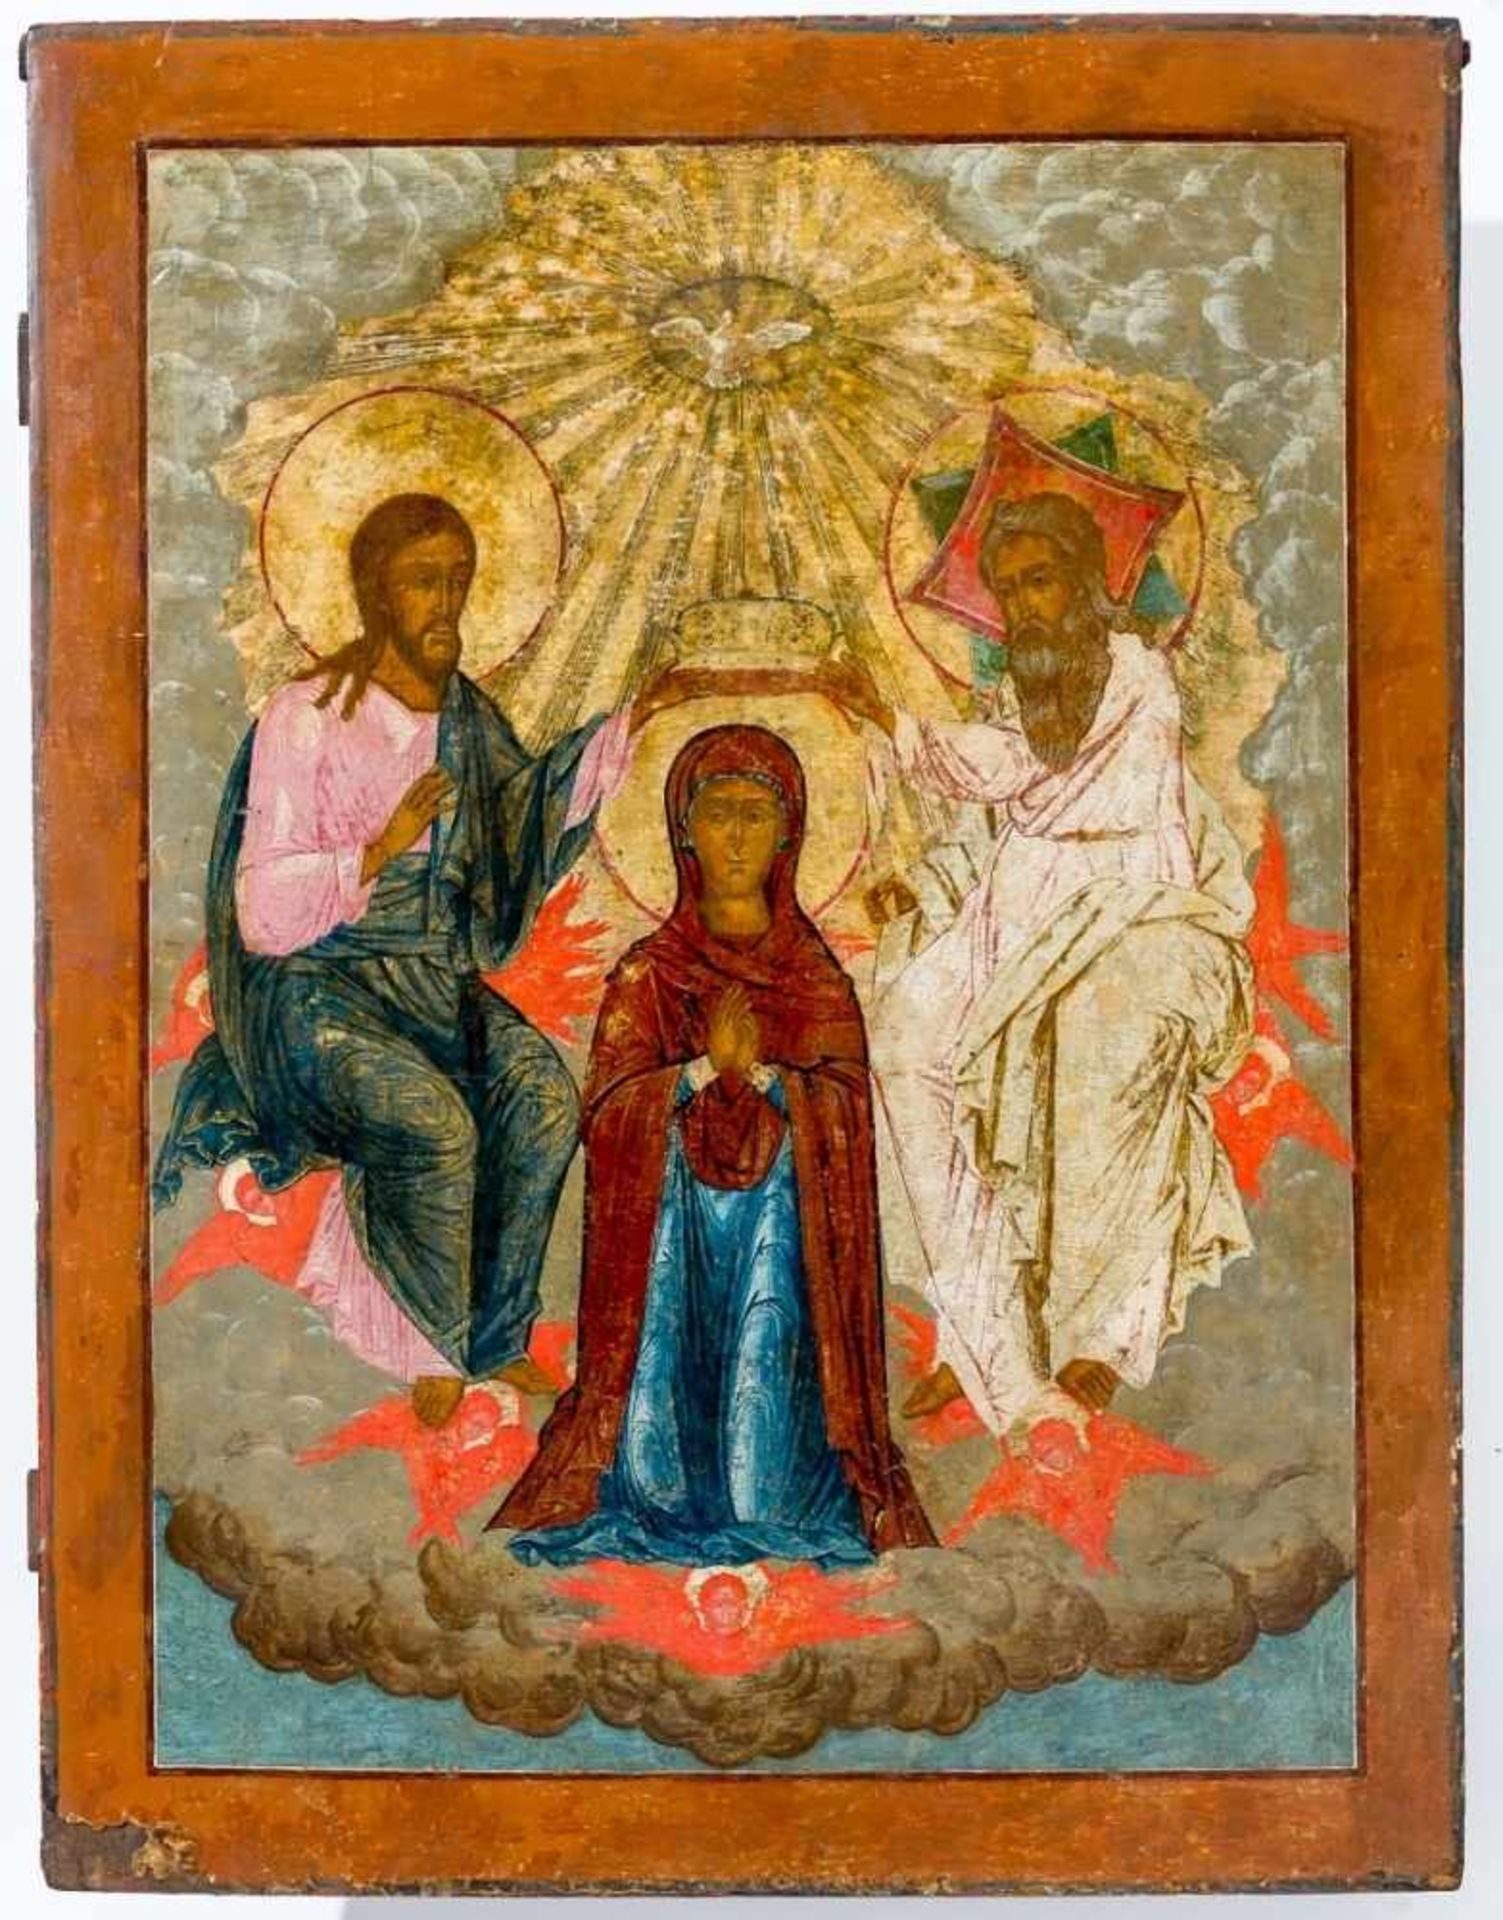 Monumental icon of the Coronation of the Mother of God, Russia, 18th century, 87 x 66